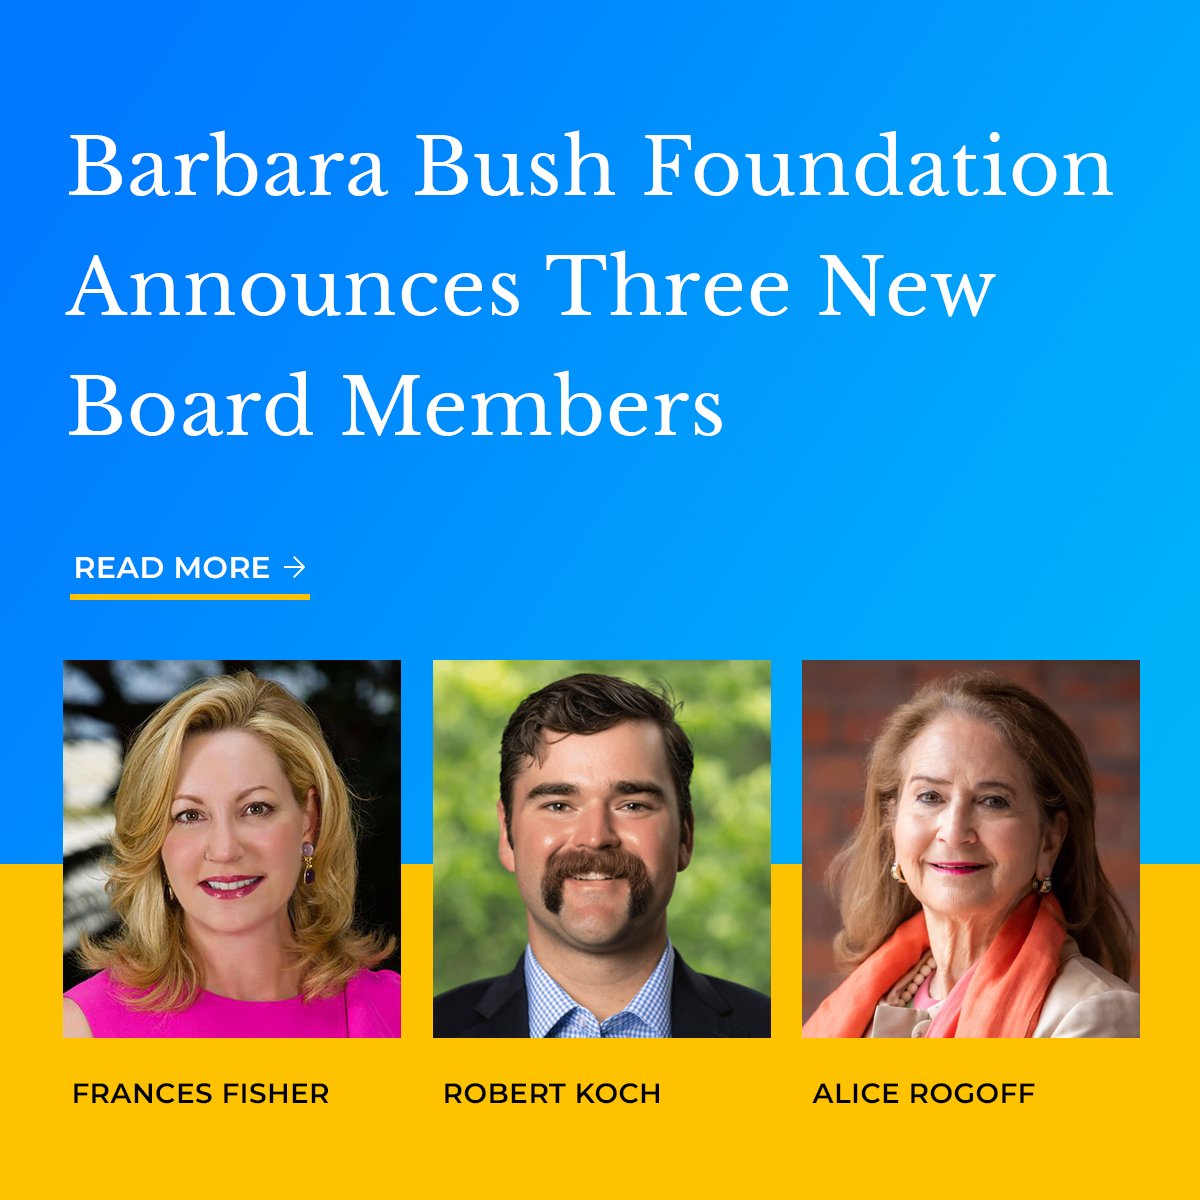 We are excited to welcome three new members to our Board of Directors. These new members bring a wealth of expertise in business, media, and philanthropy in support of our work to build a more literate America. Read more here: rb.gy/l3ljlm